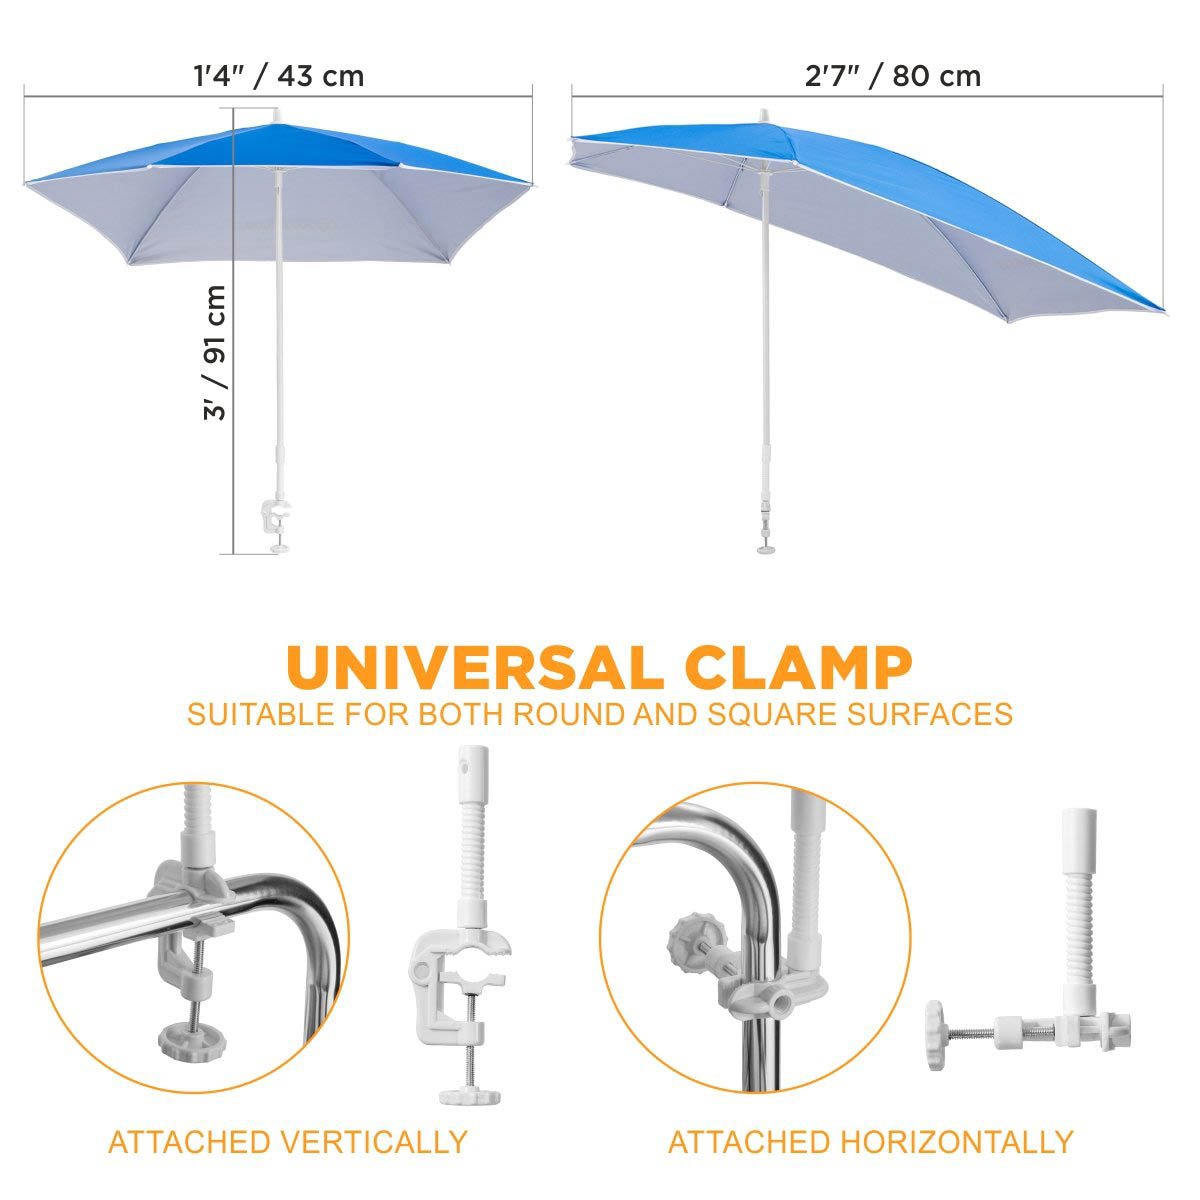 Strong Clip-On Adjustable Beach Umbrella clamps on any way you like, it is 2,7 feet long and 1.4 feet wide